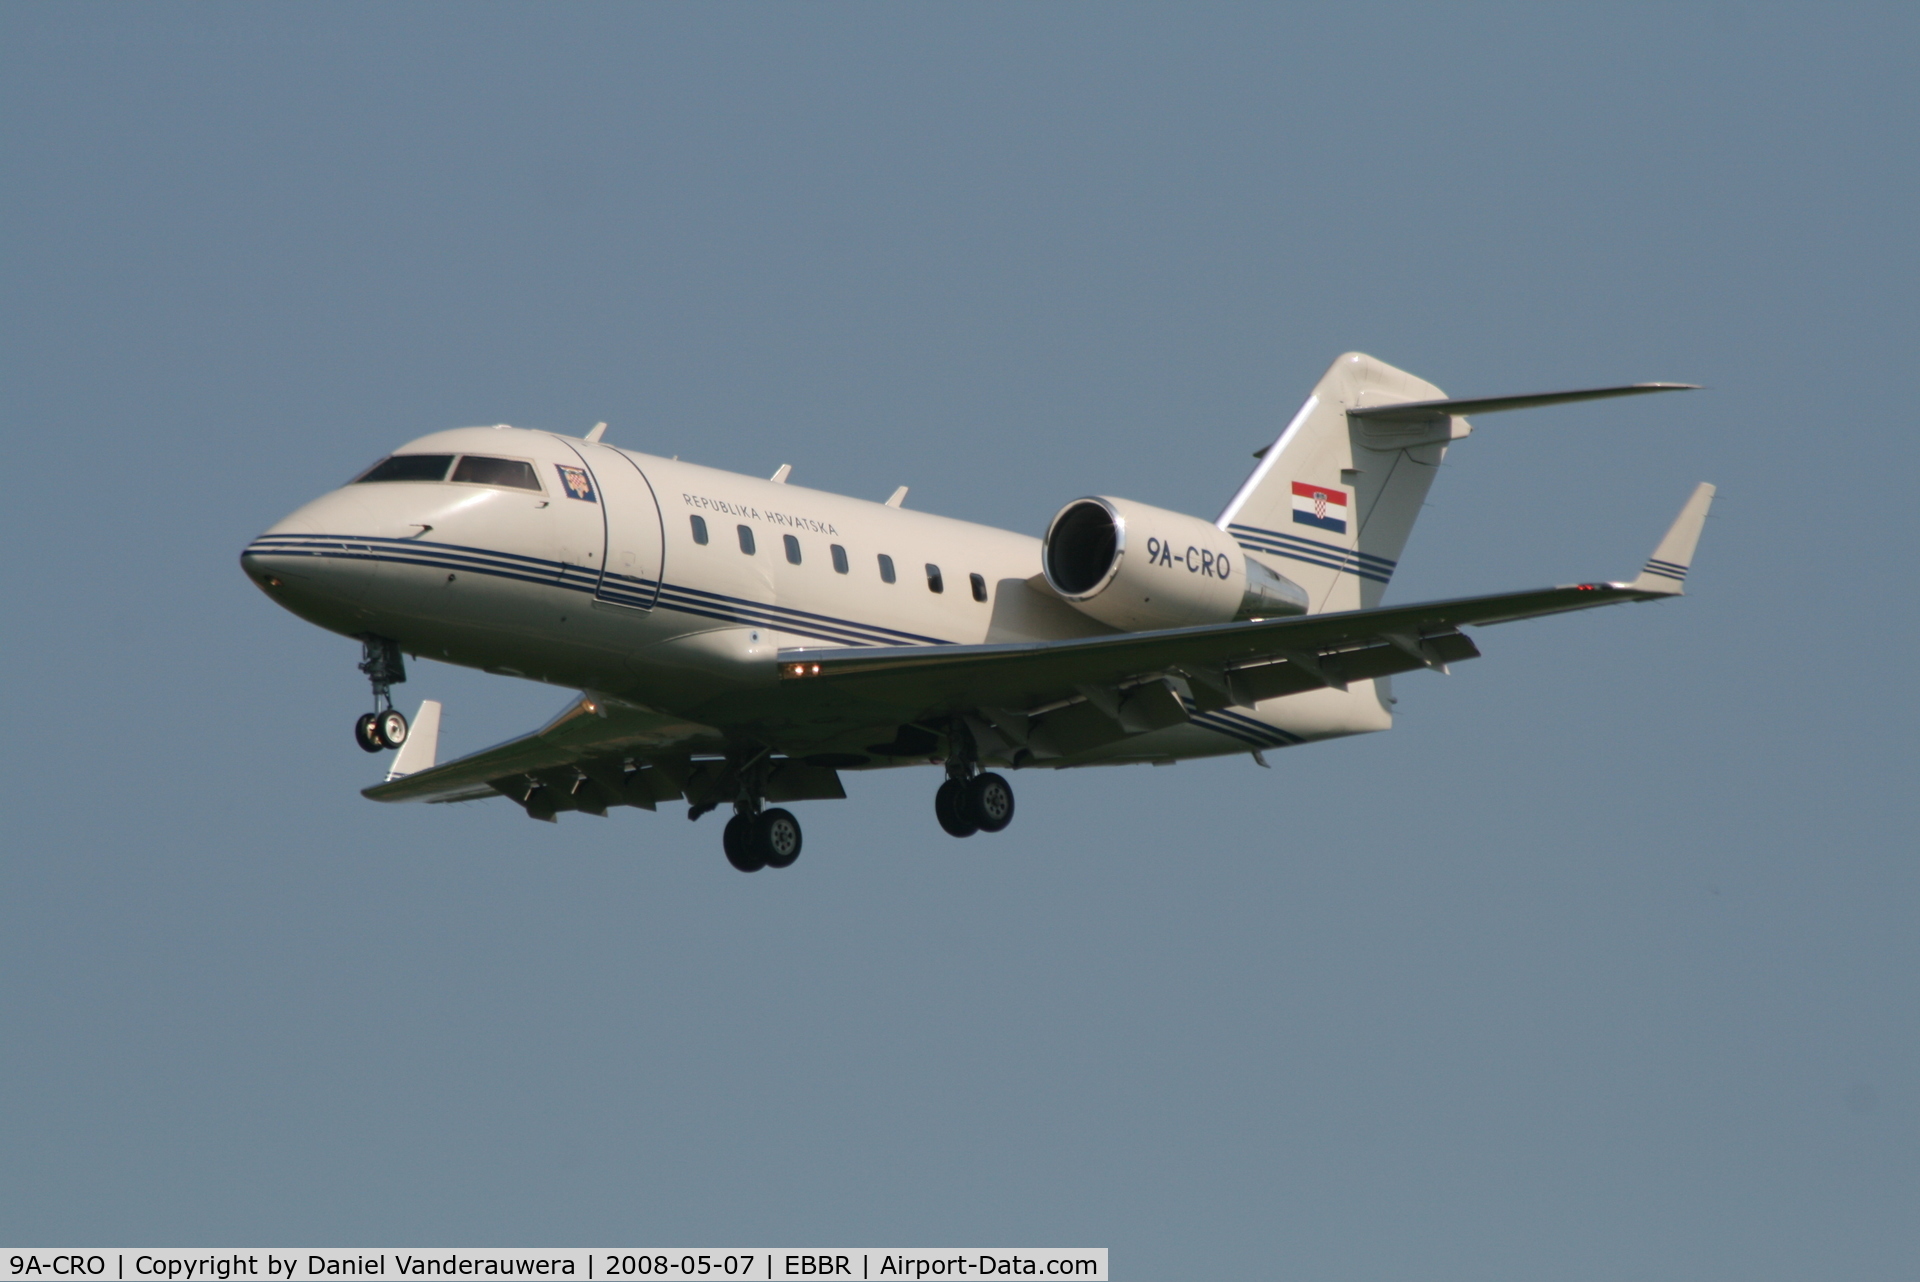 9A-CRO, 1996 Canadair Challenger 604 (CL-600-2B16) C/N 5322, descending to rwy 25L